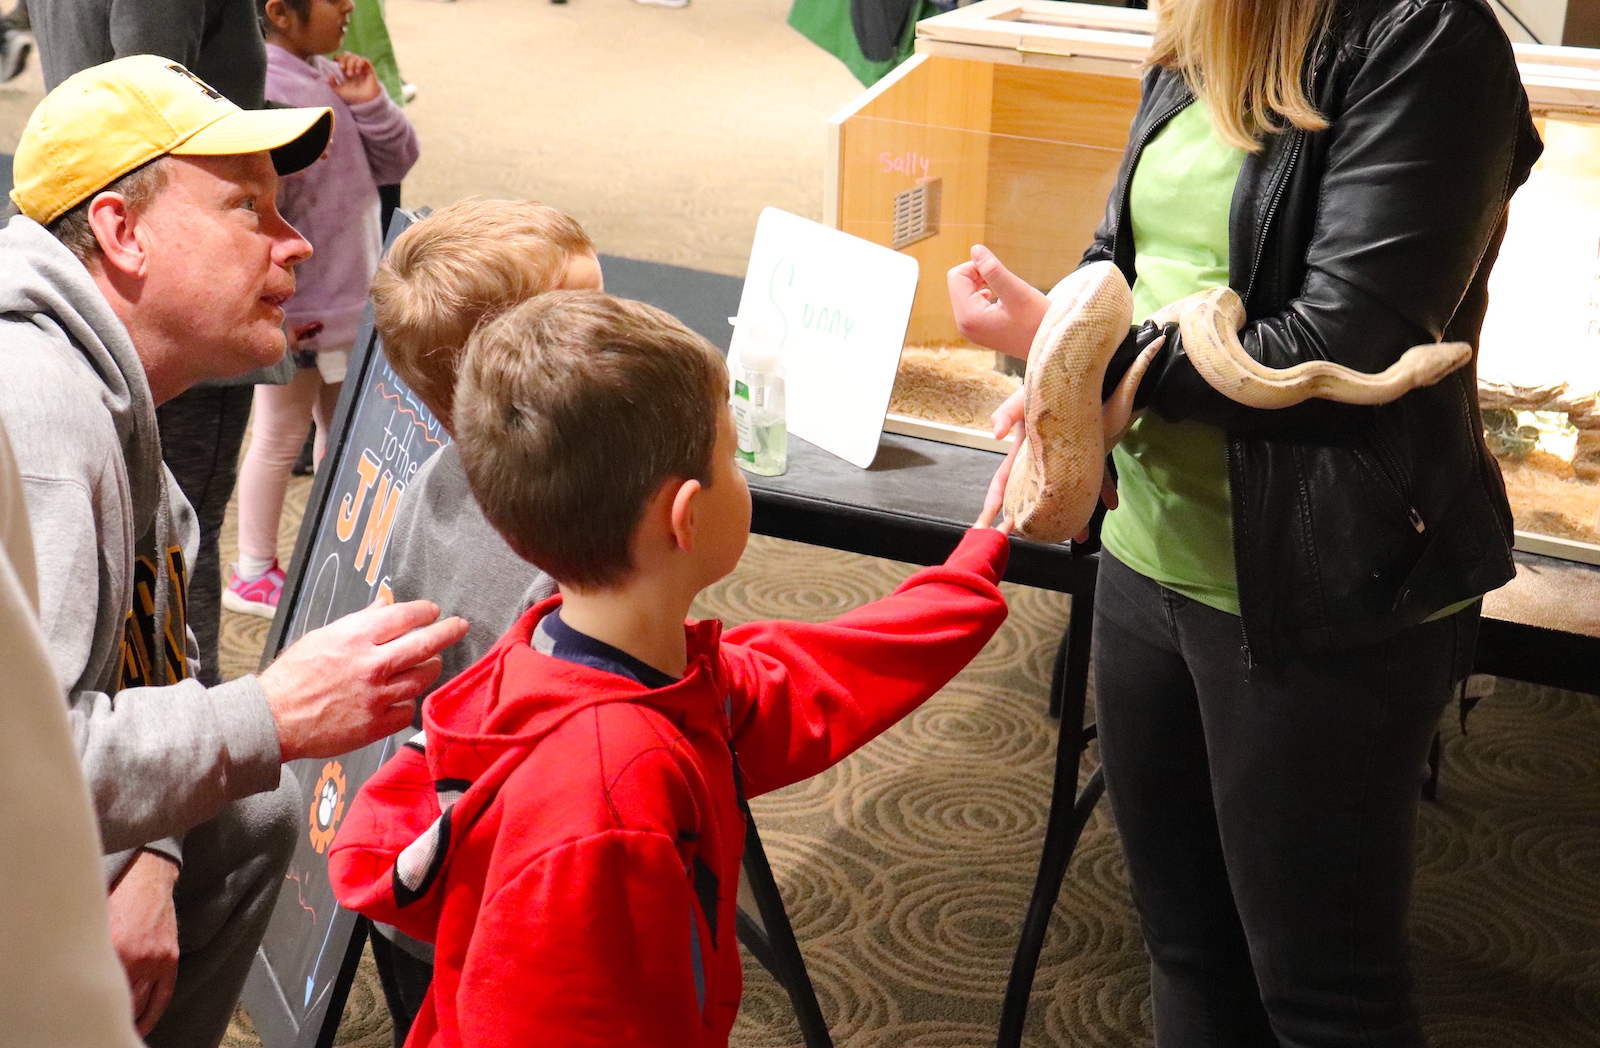 About 600 children and their parents explored University of Missouri science, technology, engineering and math research and creative activity hands-on during the Columbia Young Scientists Expo. Here, children touch a snake.